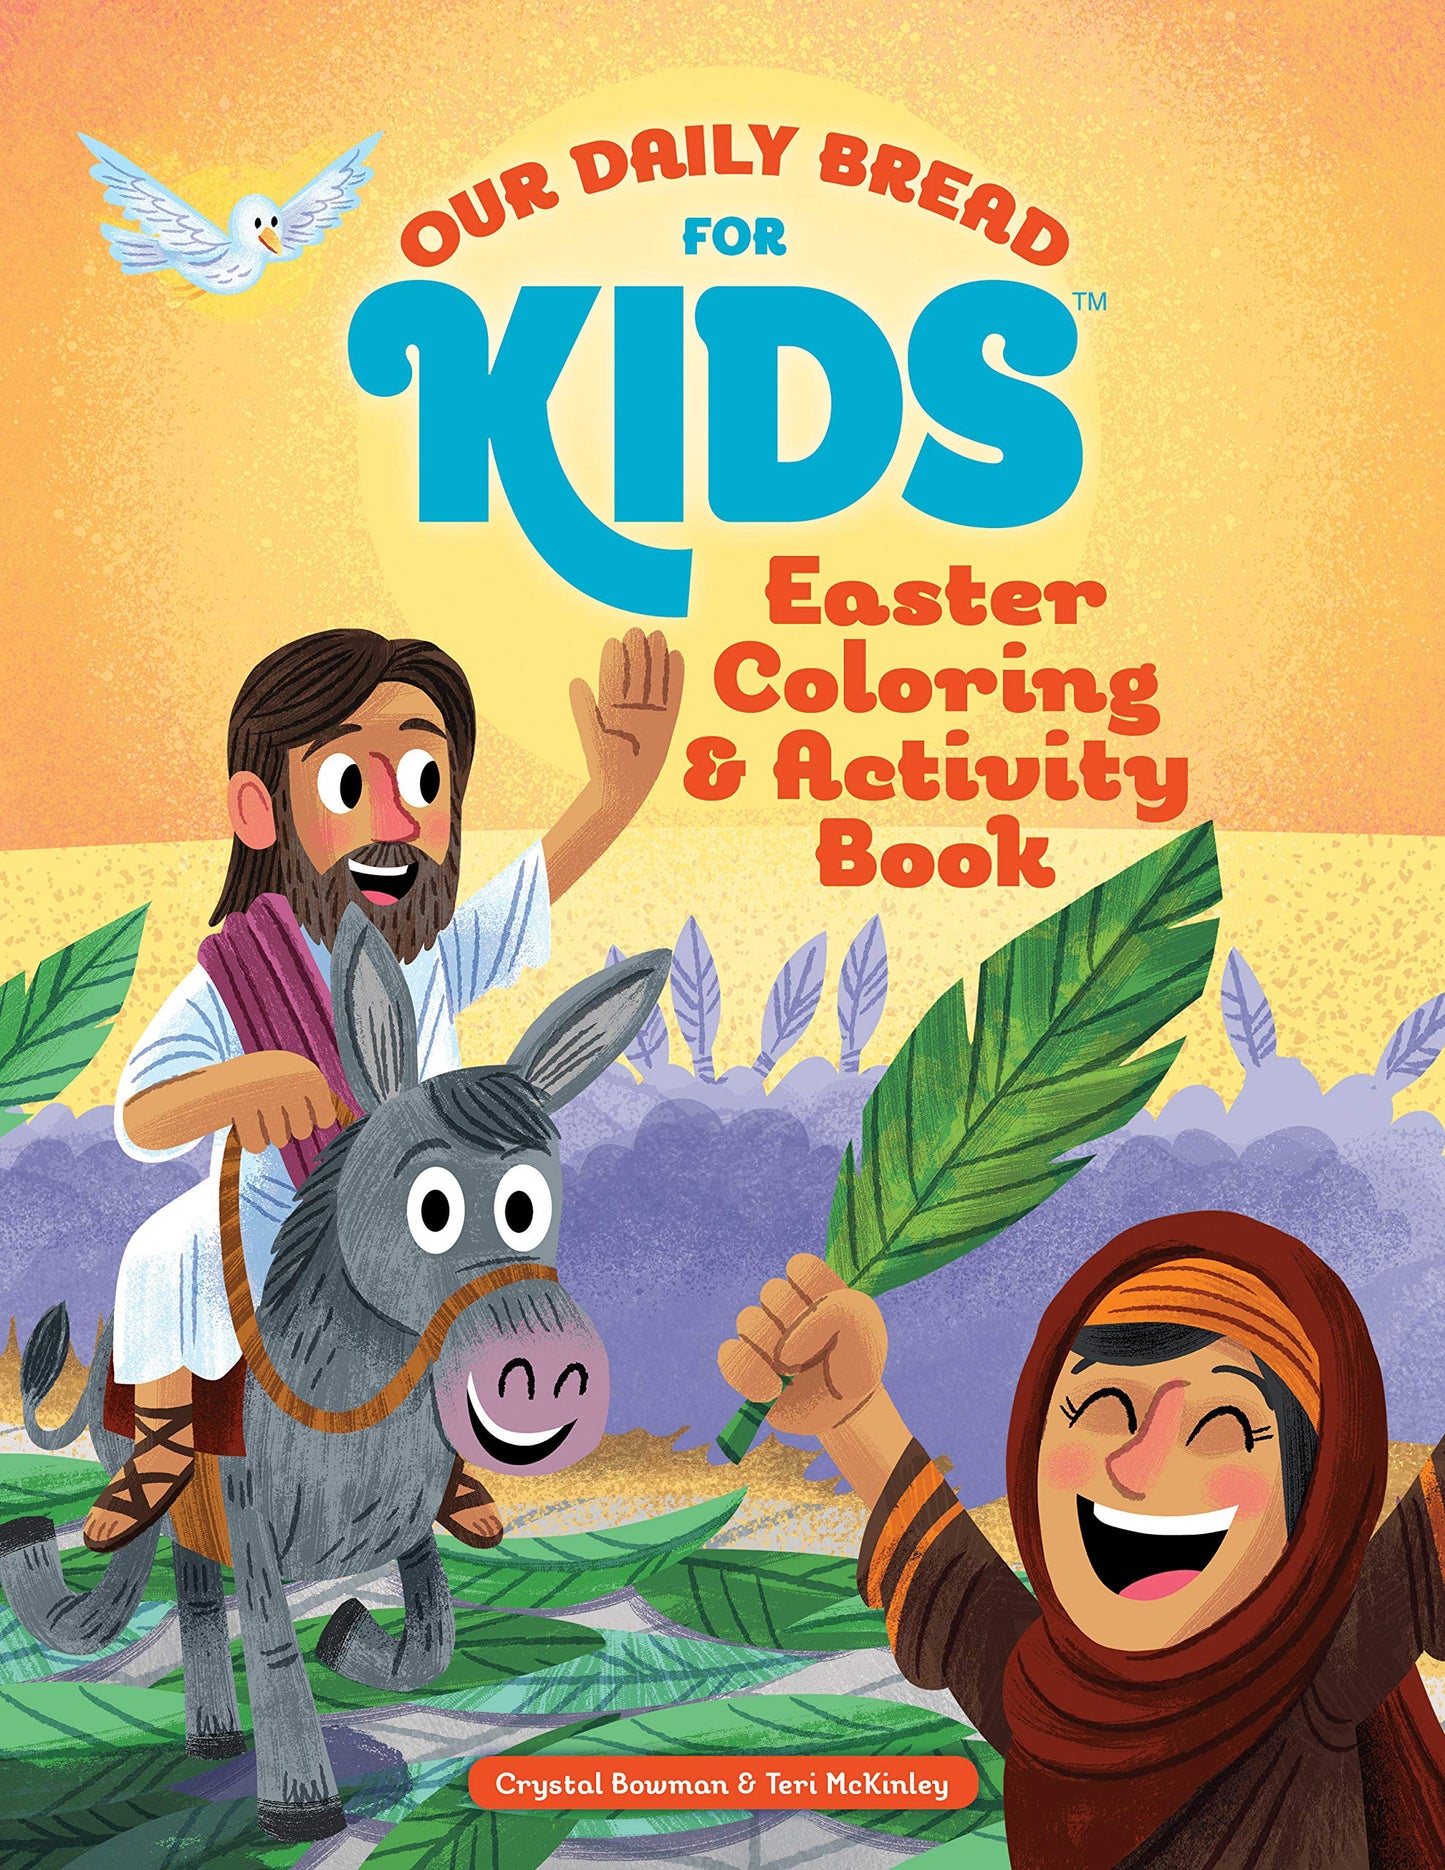 Easter Colouring and Activity Book (Our Daily Bread for Kids)